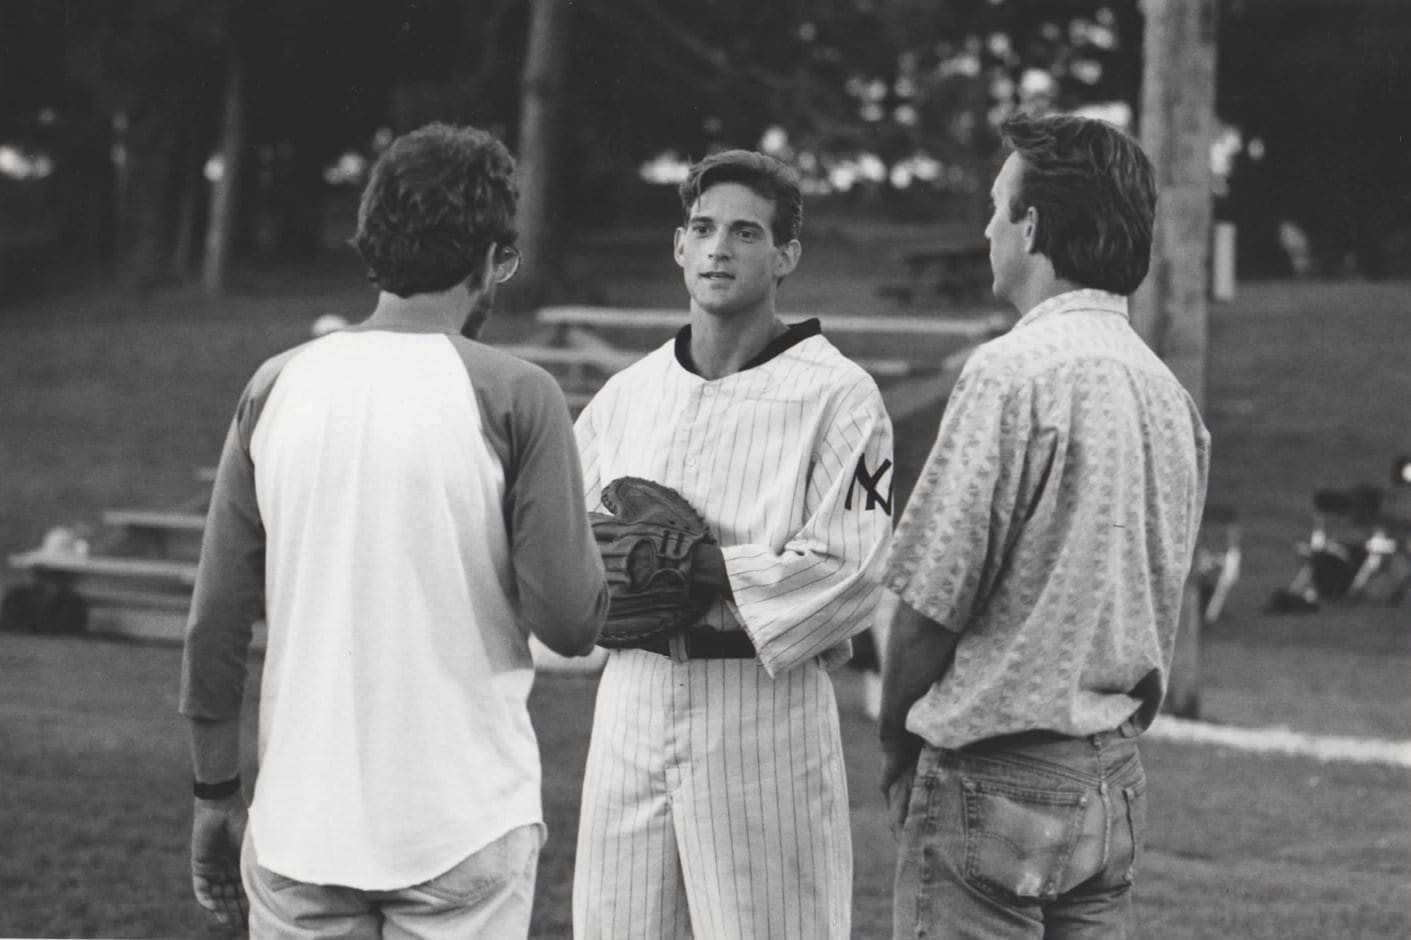 U of I actor brings recovering dad to Field of Dreams